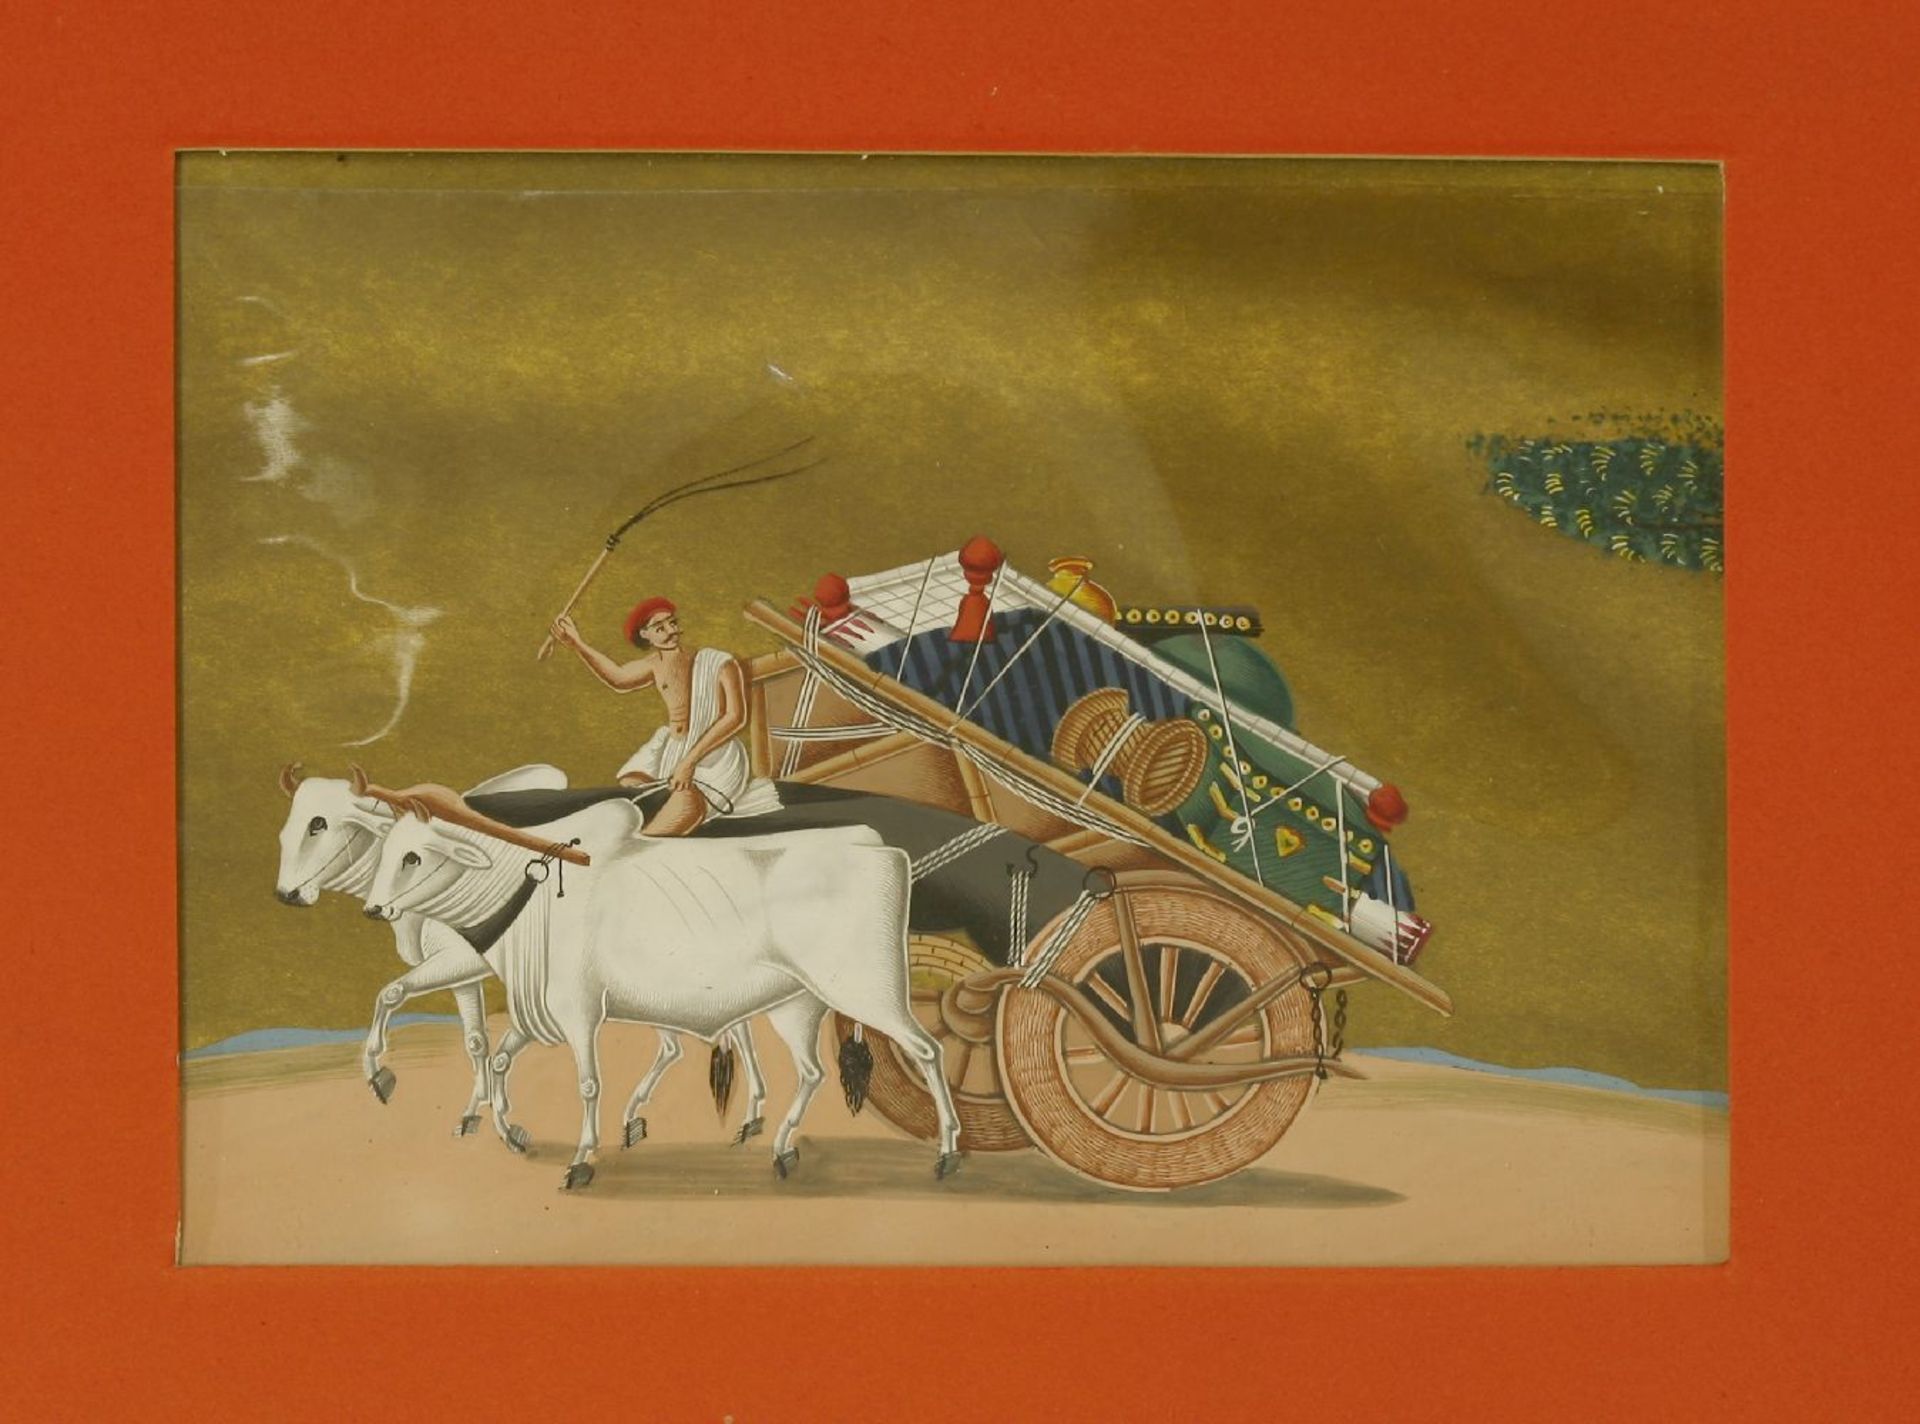 An Indian painting on mica,early 19th century, a bullock cart heavily laden with household